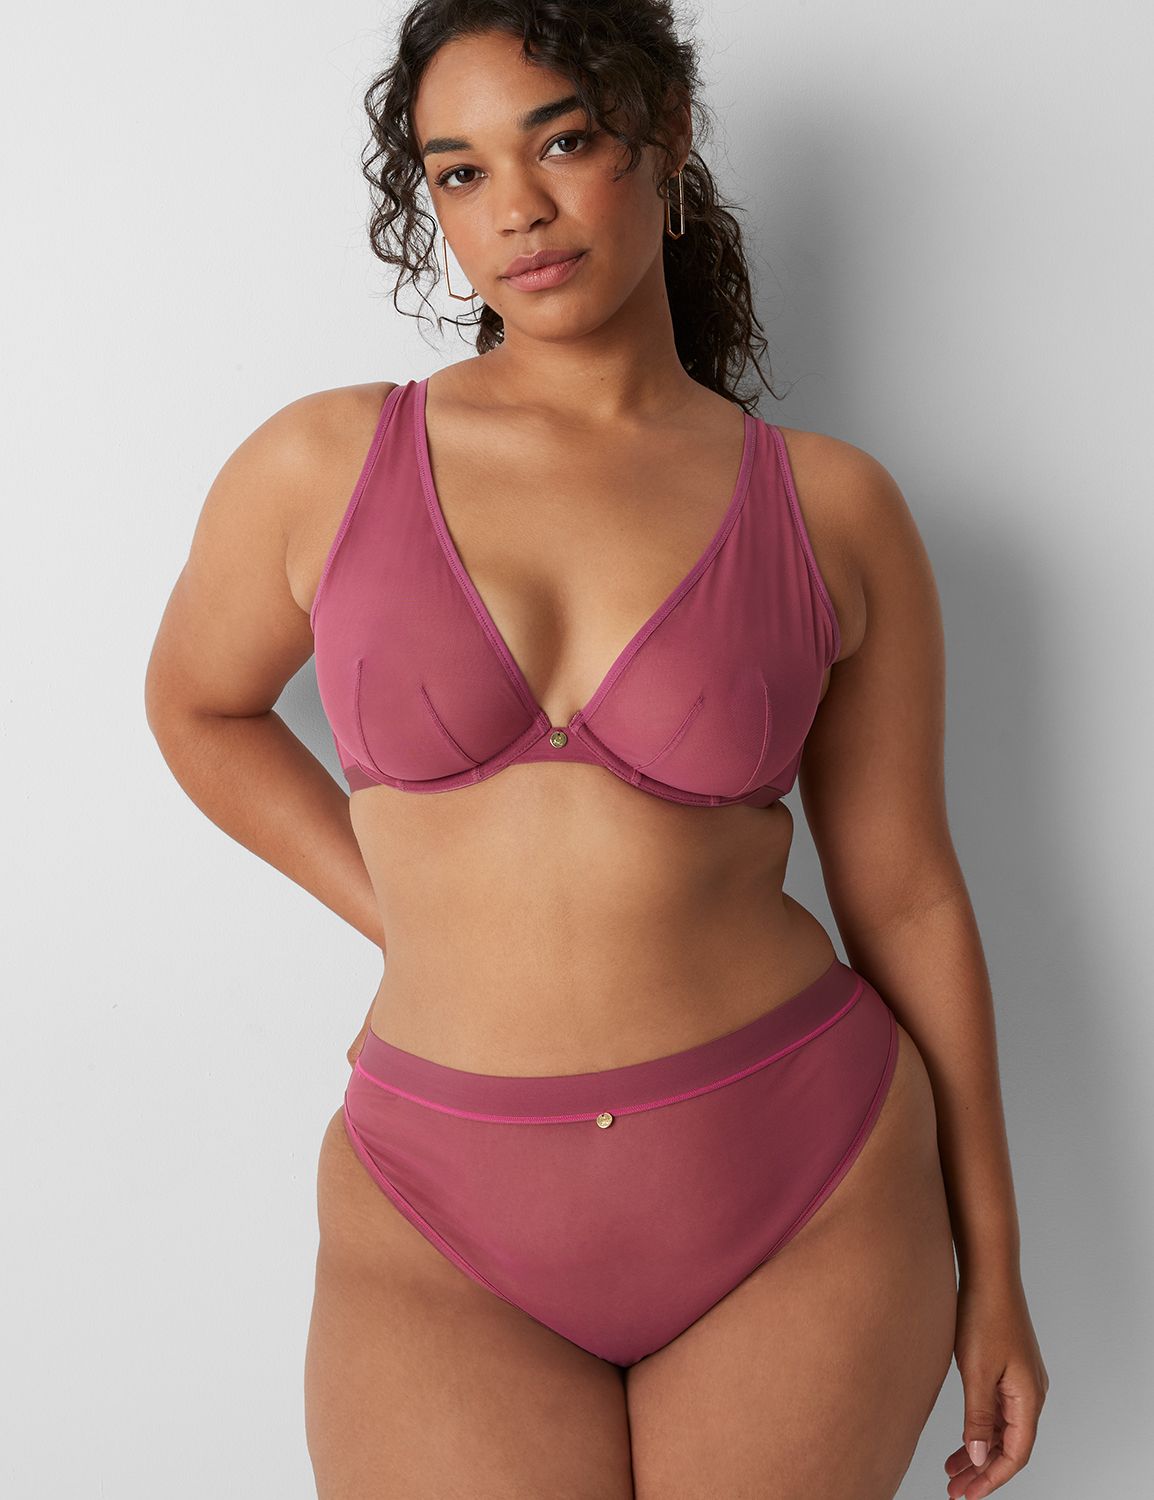 Lane Bryant Cacique Marble Mesh Unlined High Apex Underwire